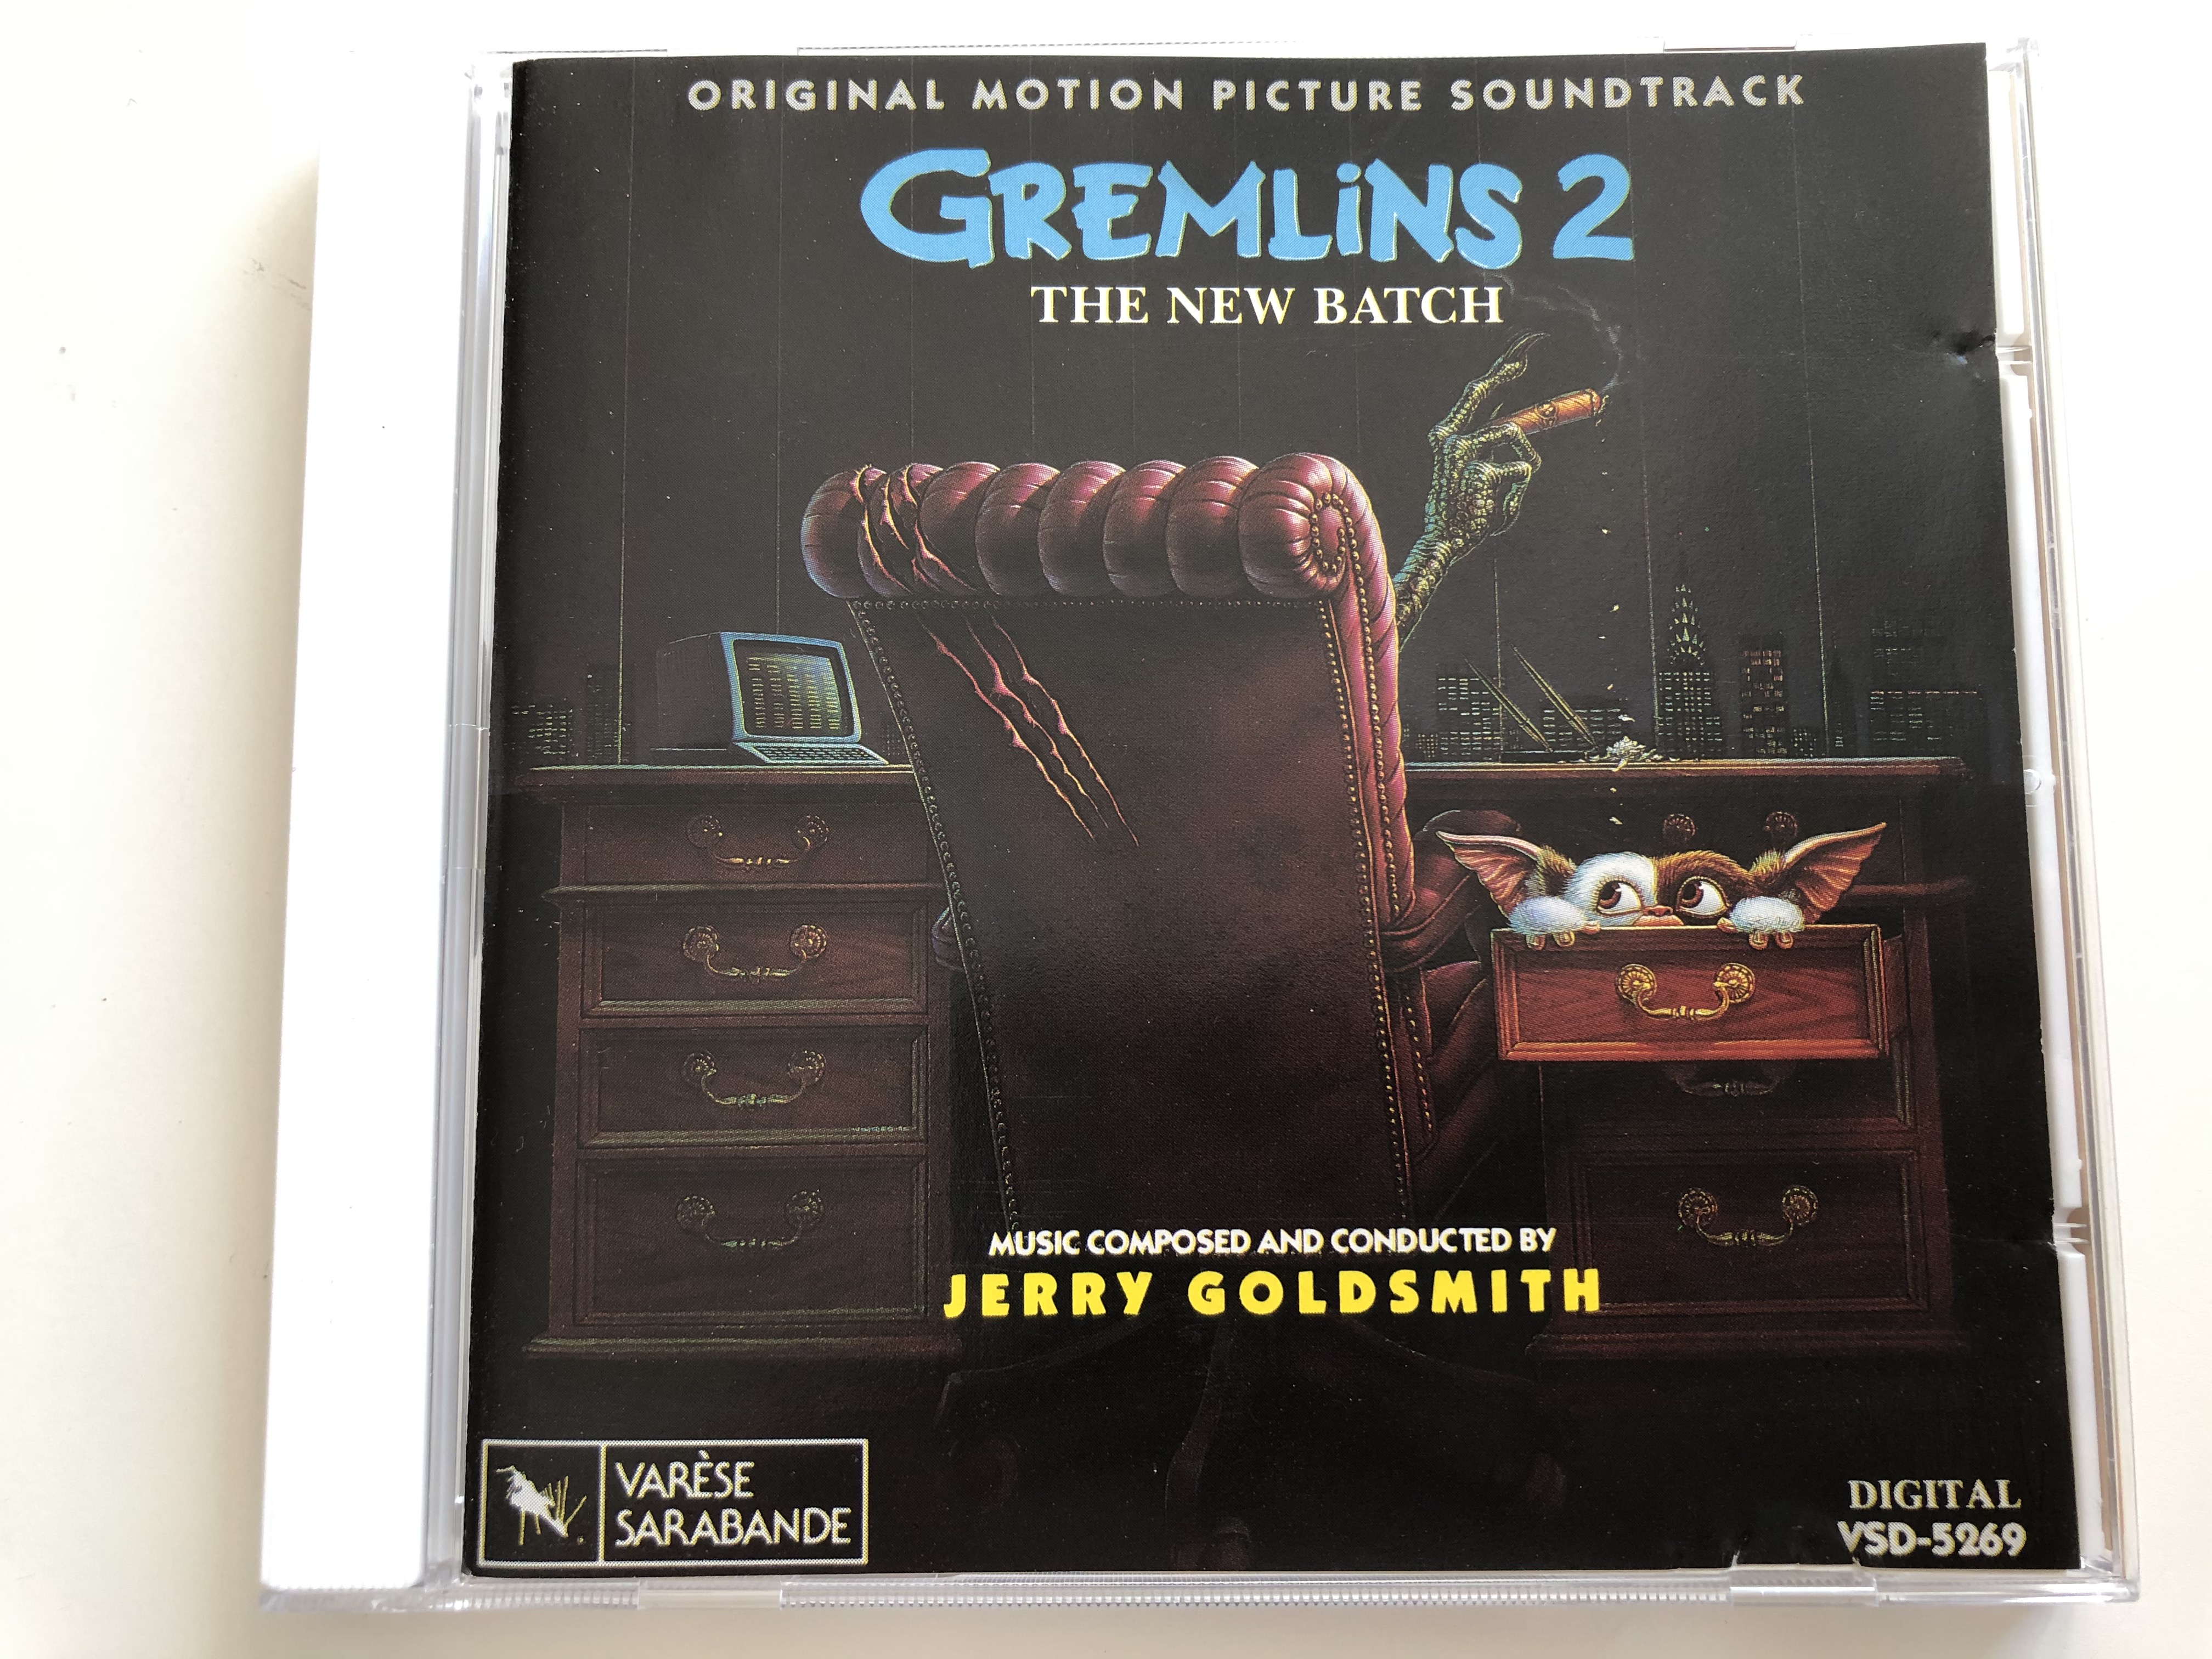 original-motion-picture-soundtrack-gremlins-2-the-new-batch-music-composed-and-conducted-by-jerry-goldsmith-var-se-sarabande-audio-cd-1990-vsd-5269-1-.jpg